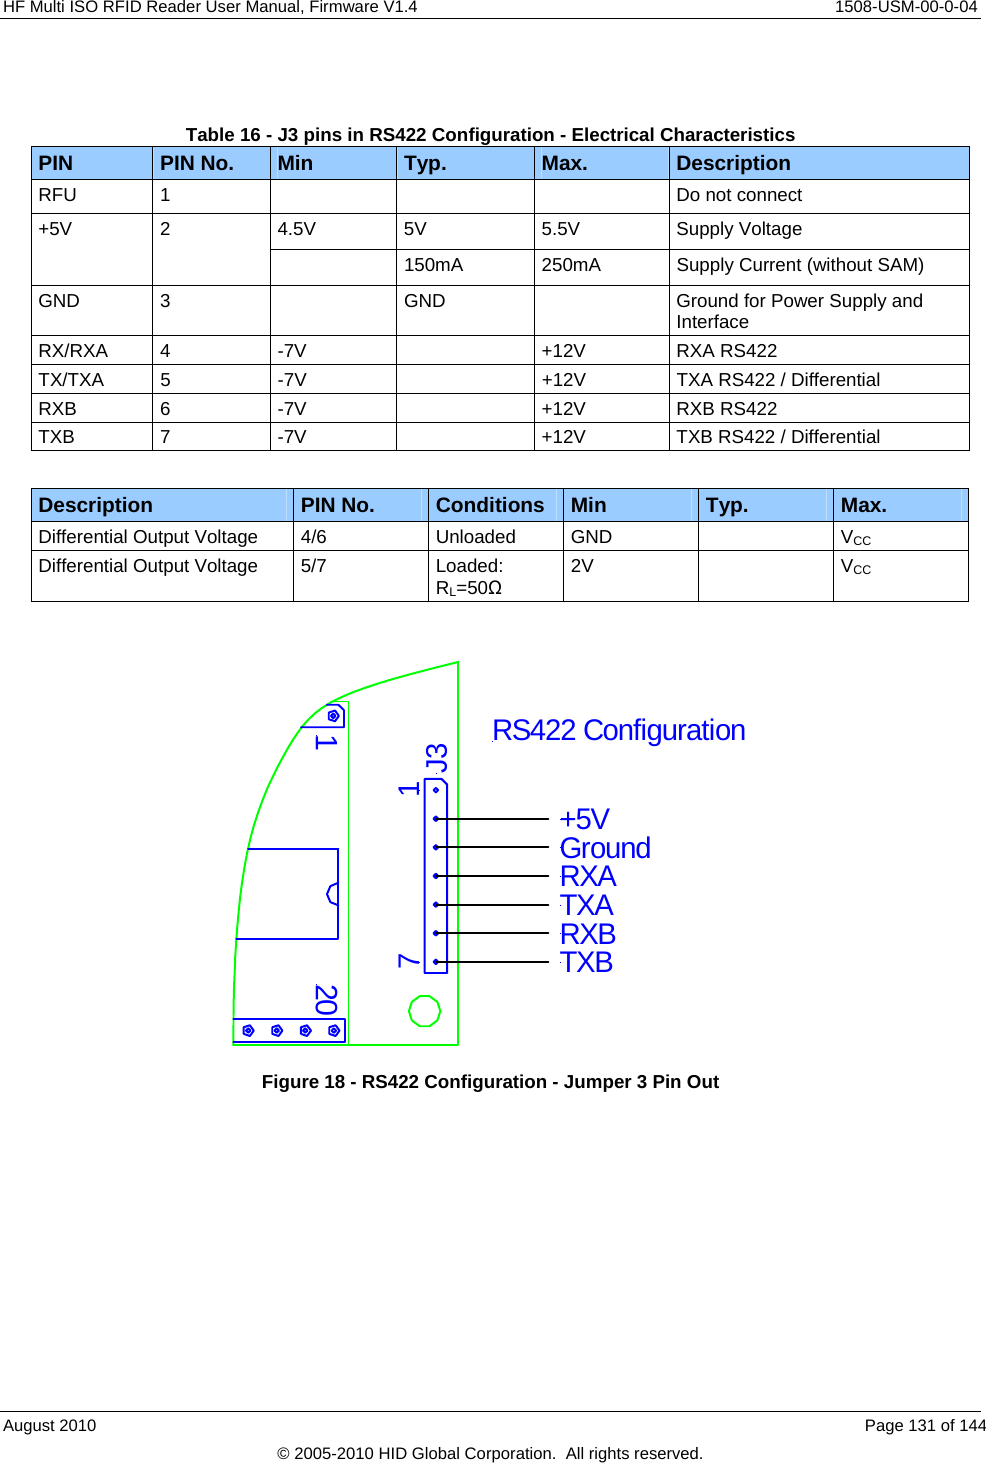  HF Multi ISO RFID Reader User Manual, Firmware V1.4    1508-USM-00-0-04  Table 16 - J3 pins in RS422 Configuration - Electrical Characteristics  PIN No.  Min  Typ.  Max.  Description PIN RFU  1        Do not connect 4.5V 5V  5.5V  Supply Voltage +5V 2   150mA  250mA  Supply Current (without SAM) GND  3    GND    Ground for Power Supply and Interface RX/RXA 4  -7V    +12V  RXA RS422 TX/TXA  5  -7V    +12V  TXA RS422 / Differential RXB 6  -7V    +12V  RXB RS422 TXB  7  -7V    +12V  TXB RS422 / Differential  PIN No.  Conditions  Min  Typ.  Max. Description Differential Output Voltage 4/6  Unloaded  GND    VCC Differential Output Voltage 5/7  Loaded: RL=50Ω VCC 2V   12017 J3+5VGroundRXATXARS422 ConfigurationRXBTXB Figure 18 - RS422 Configuration - Jumper 3 Pin Out August 2010    Page 131 of 144 © 2005-2010 HID Global Corporation.  All rights reserved. 